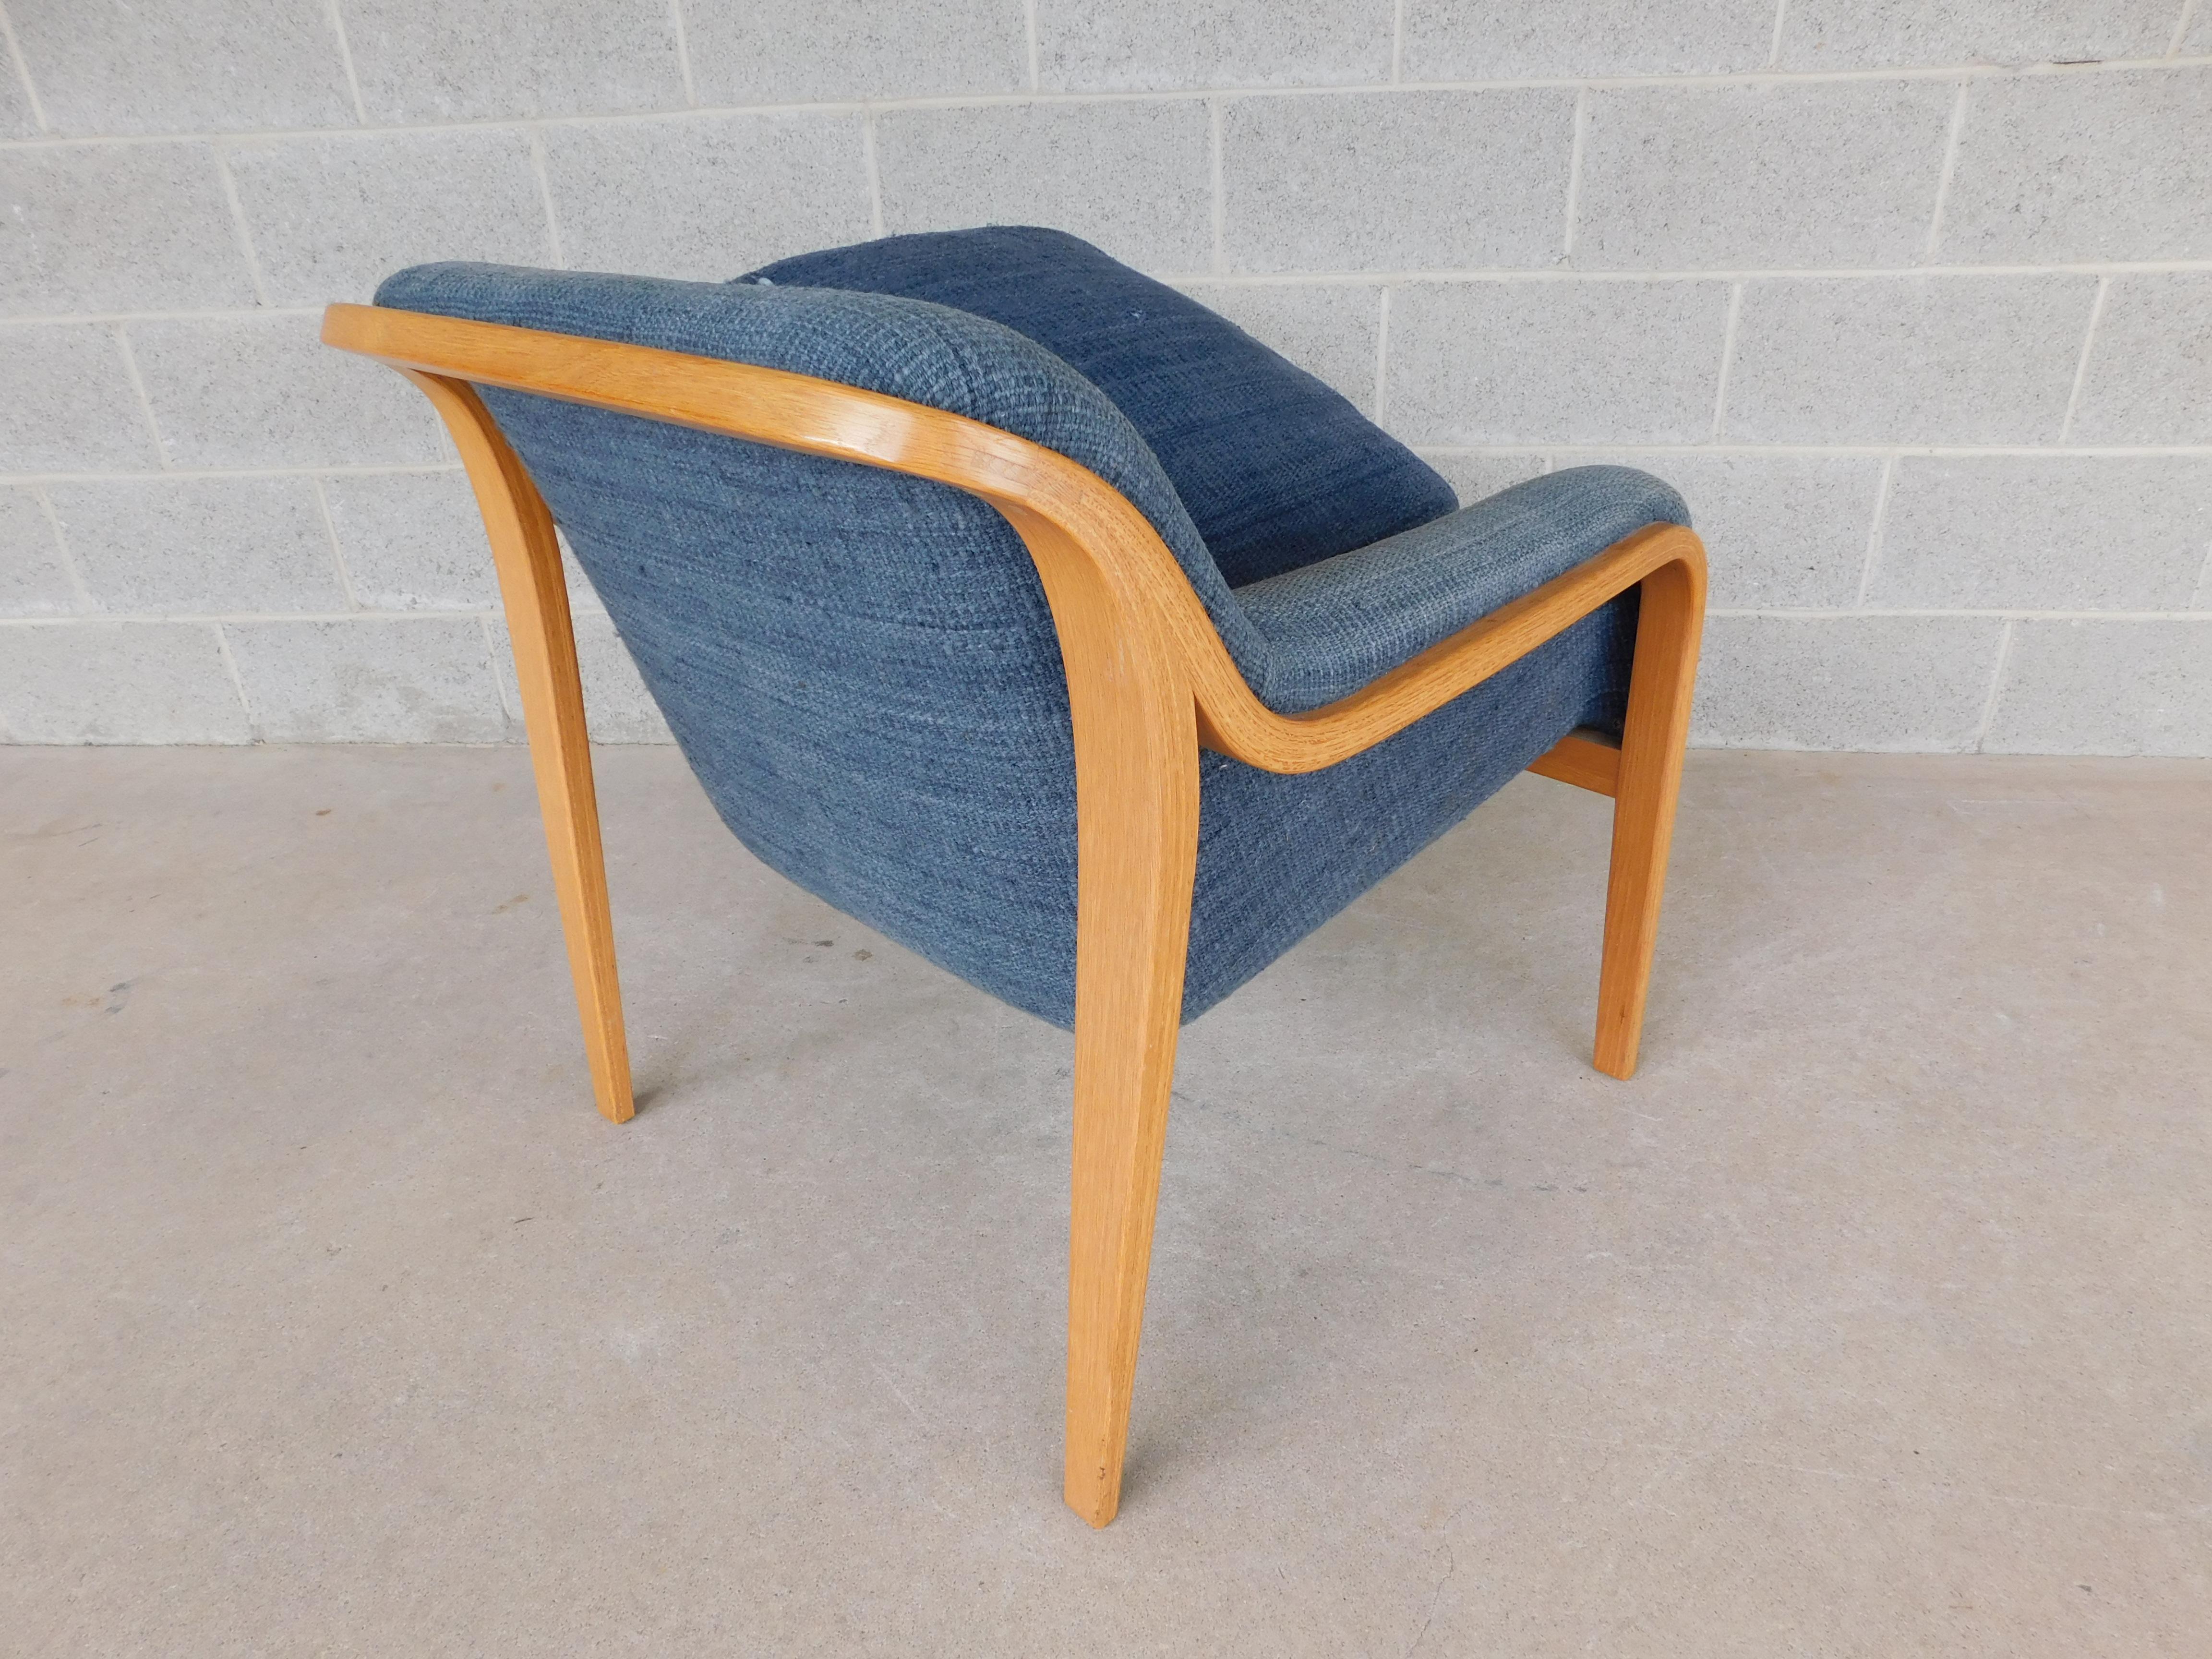 Bentwood lounge chair. Covered in a vintage light / medium blue upholstery. Designed by Bill Stephens for Knoll. Features Original Upholstery with Clasp Retainers, Shows Wear to the Upholstery Cushion Bottoms and Under Arm Lower Sides Cushion